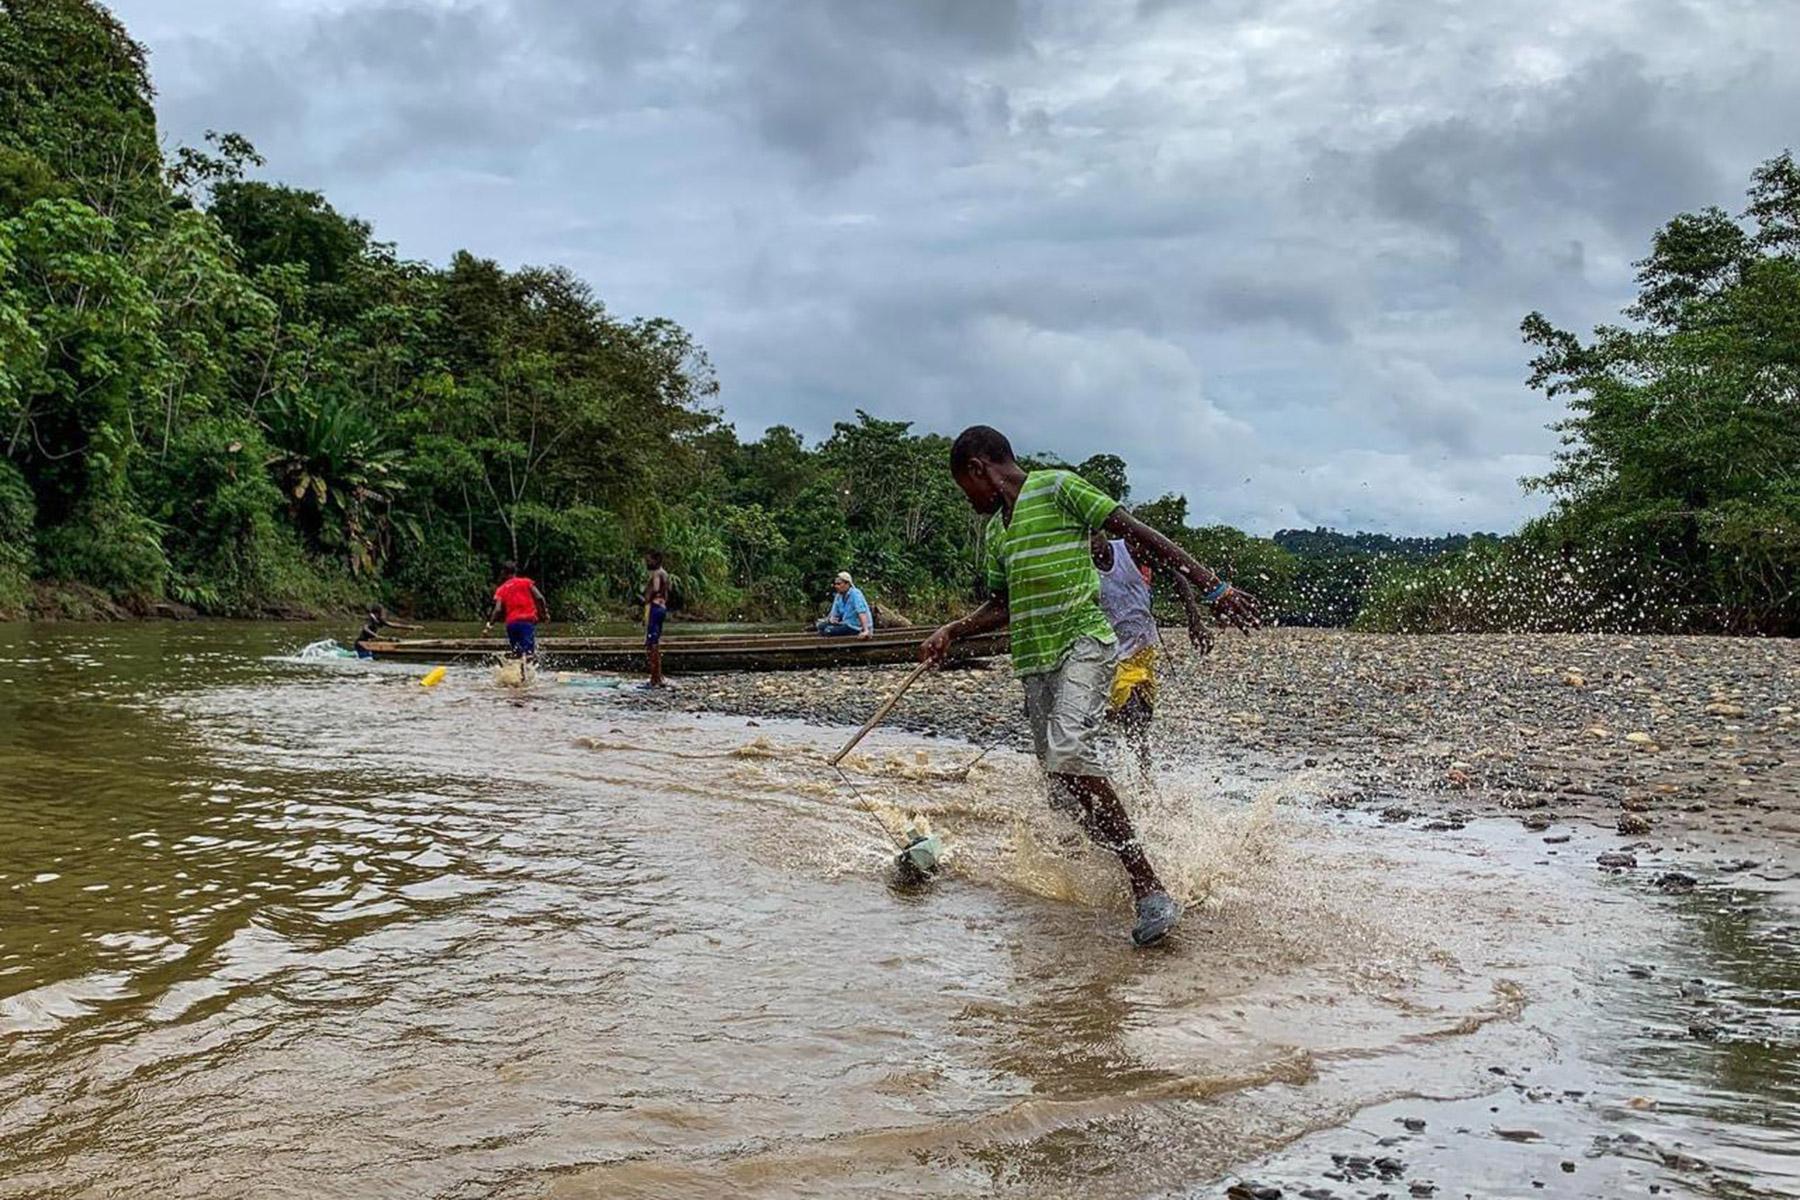 Youth playing on the banks of RÃ­o Pogue in Atrato, northwestern Colombia. The LWF supports local communities to uphold their rights and protect the Atrato River, which has been polluted by material from extractive industries for decades. Photo: LWF/G. A. Moreno Clavijo